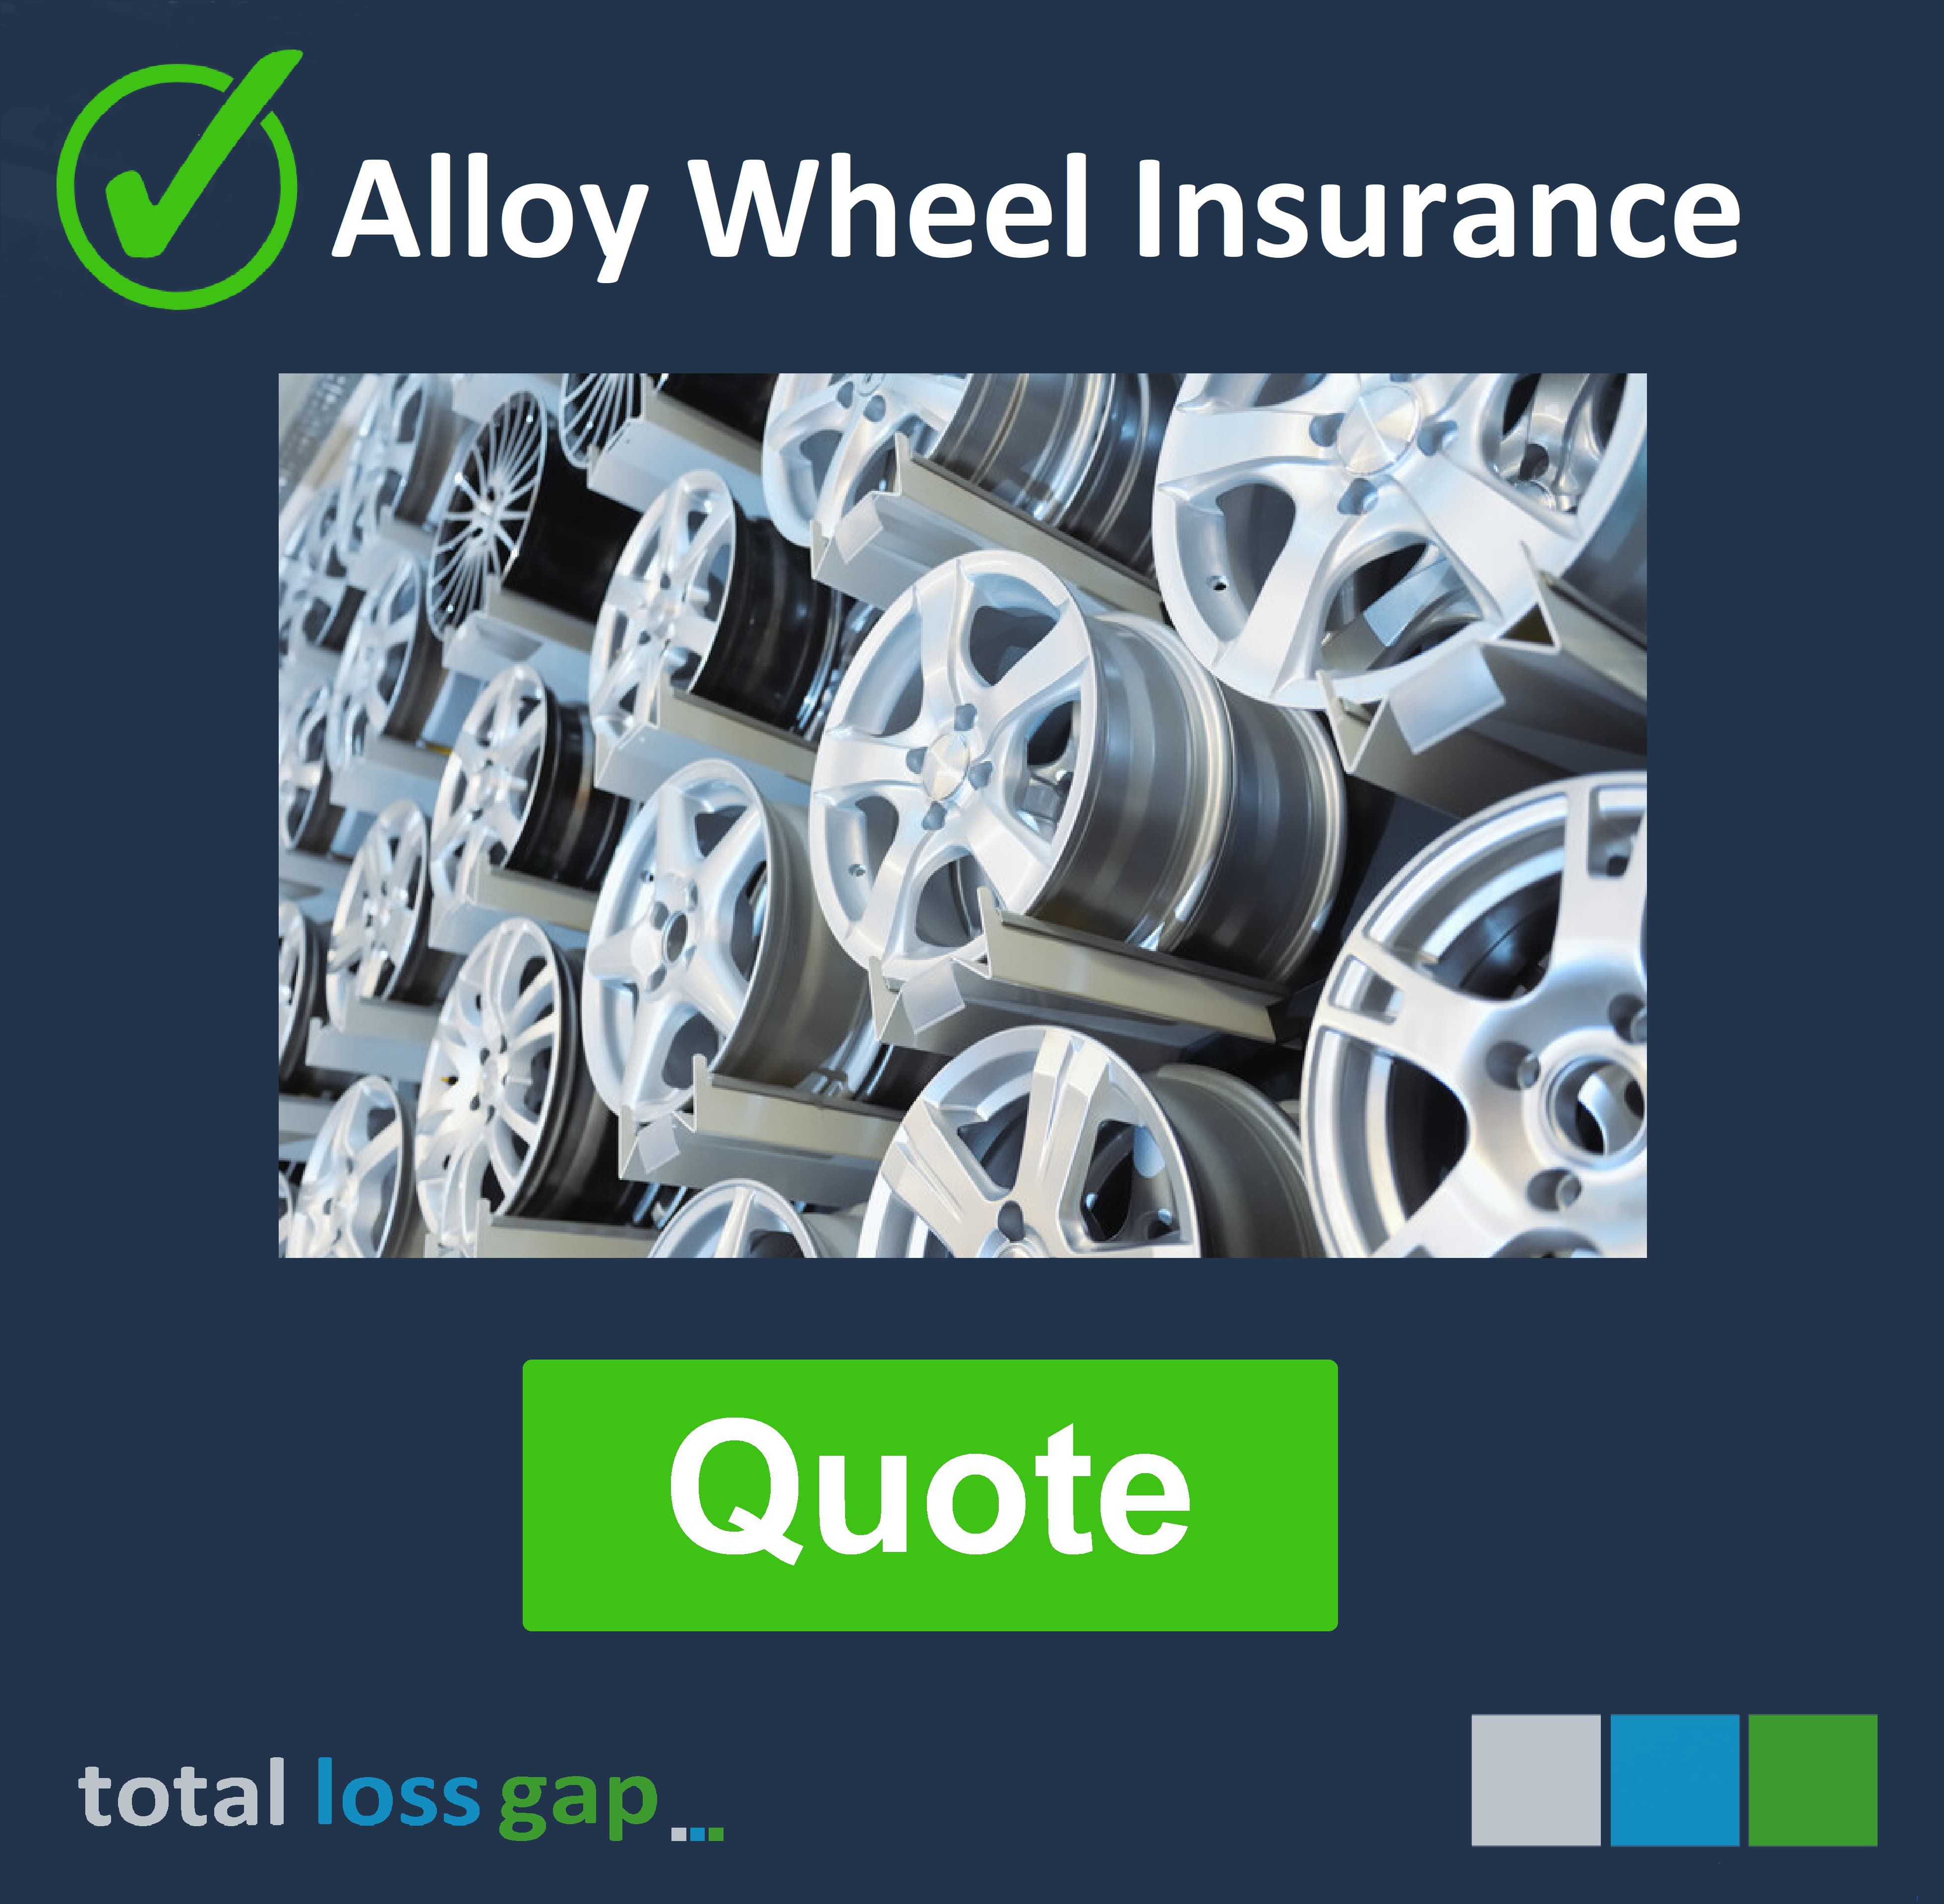 Alloy Wheel Insurance for your BMW